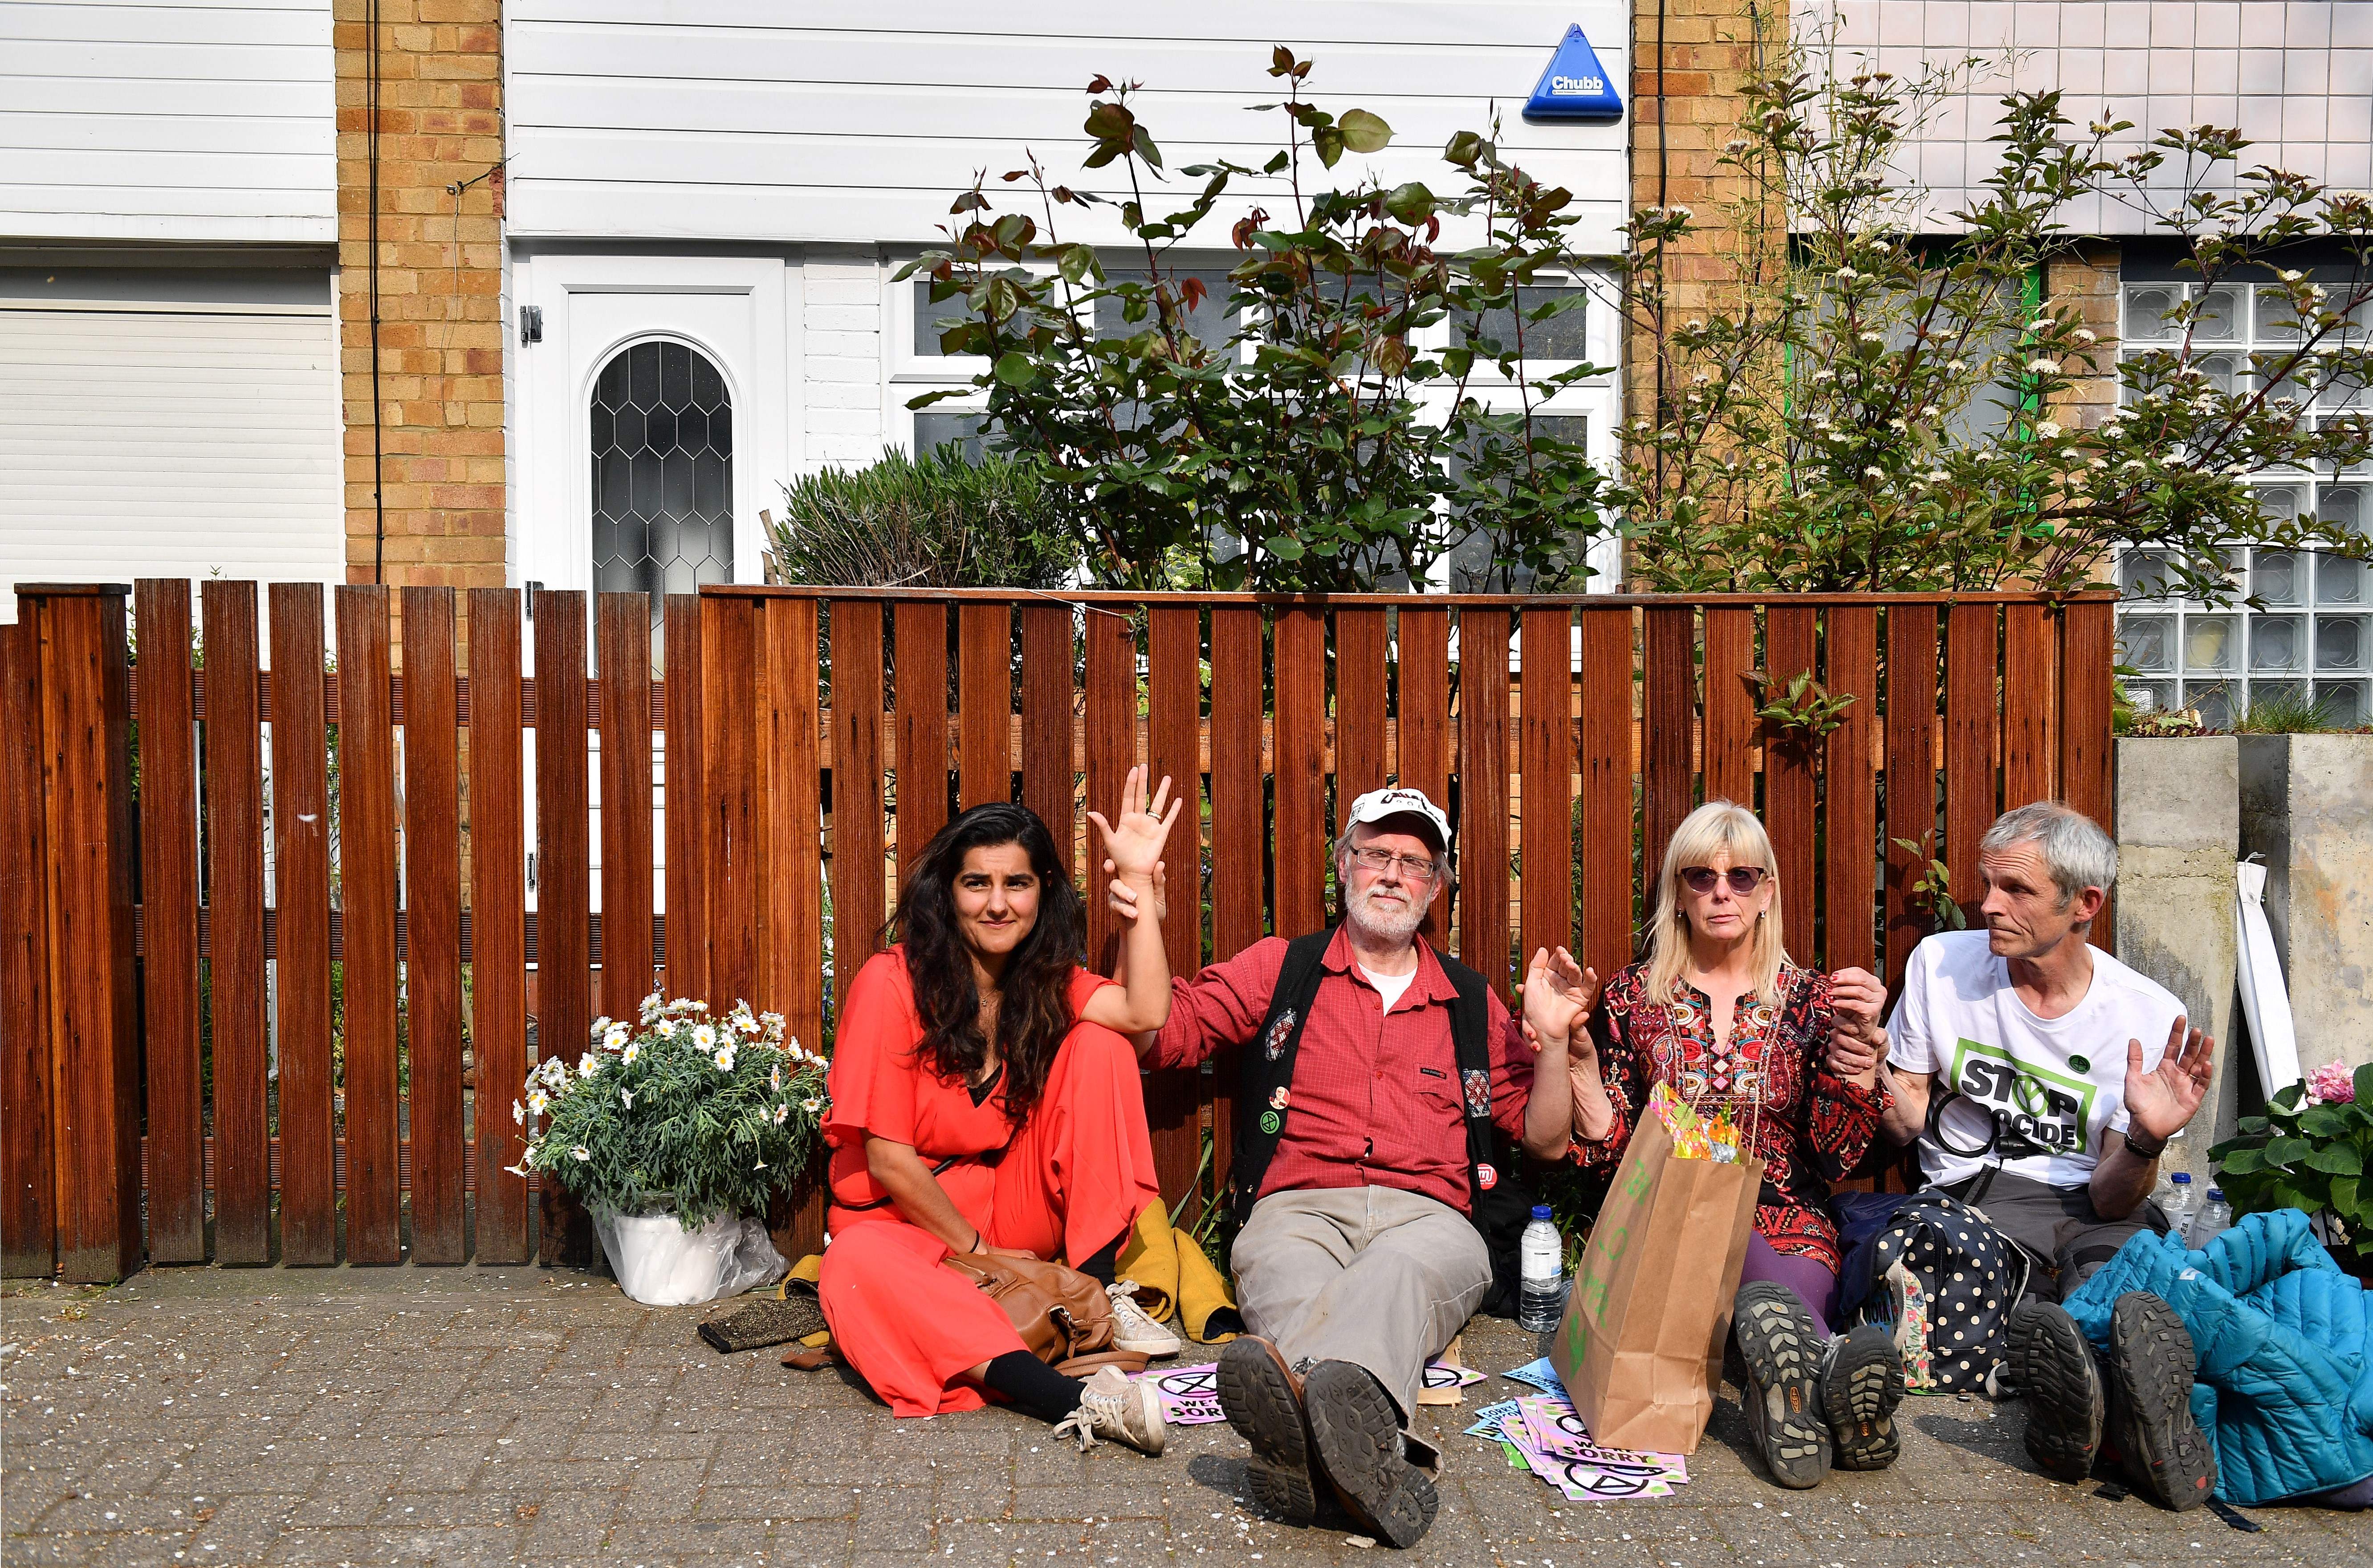 Climate change activists, including Labour party councillor in Stroud Skeena Rathor, pictured left, have glued their hands together and locked themselves to the fence outside the home of Britain's opposition Labour party leader Jeremy Corbyn on the third day of an environmental protest by the Extinction Rebellion group. 